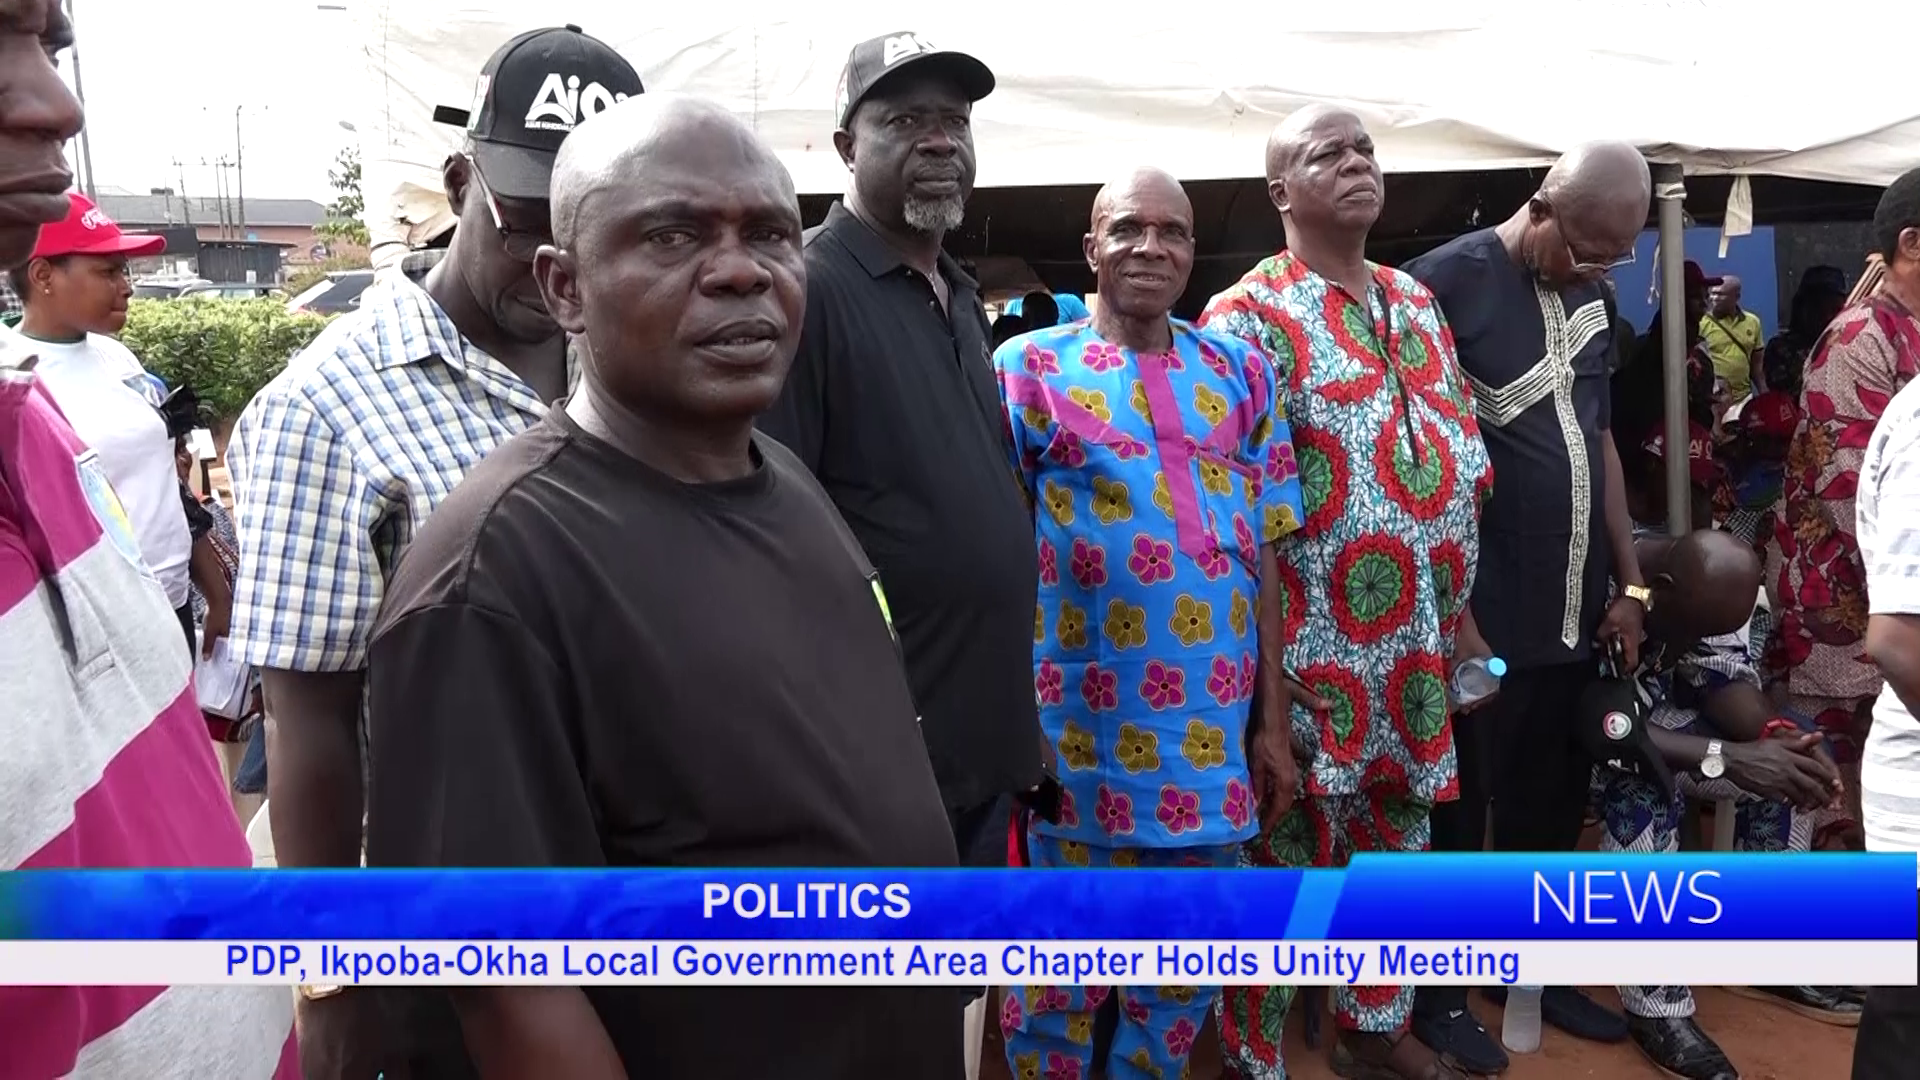 PDP, Ikpoba-Okha Local Government Area Chapter Holds Unity Meeting